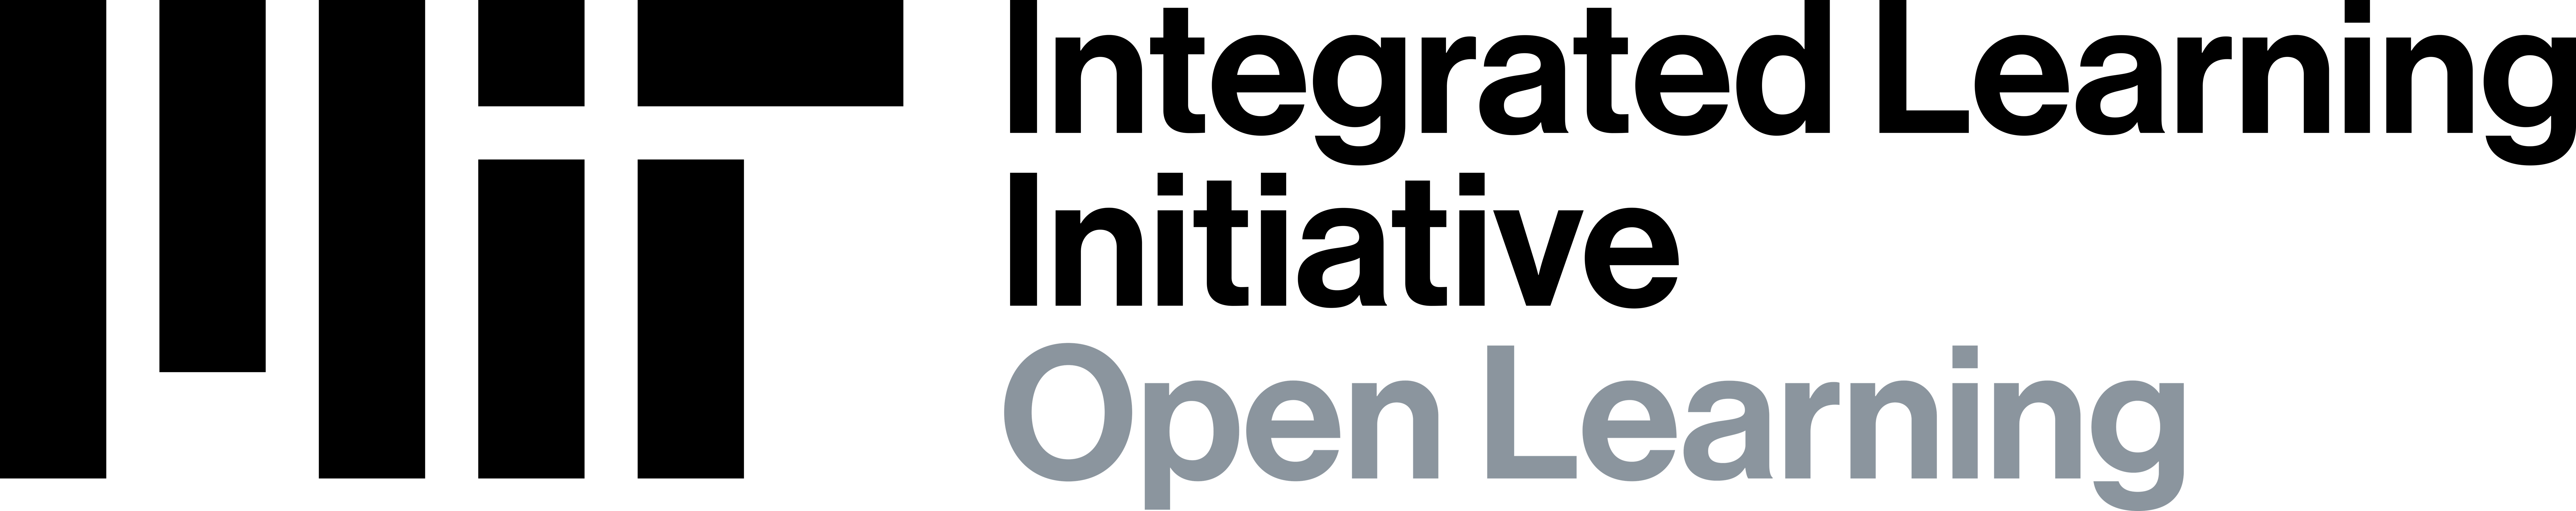 MIT Open Learning Integrated Learning Initiative text-based logo